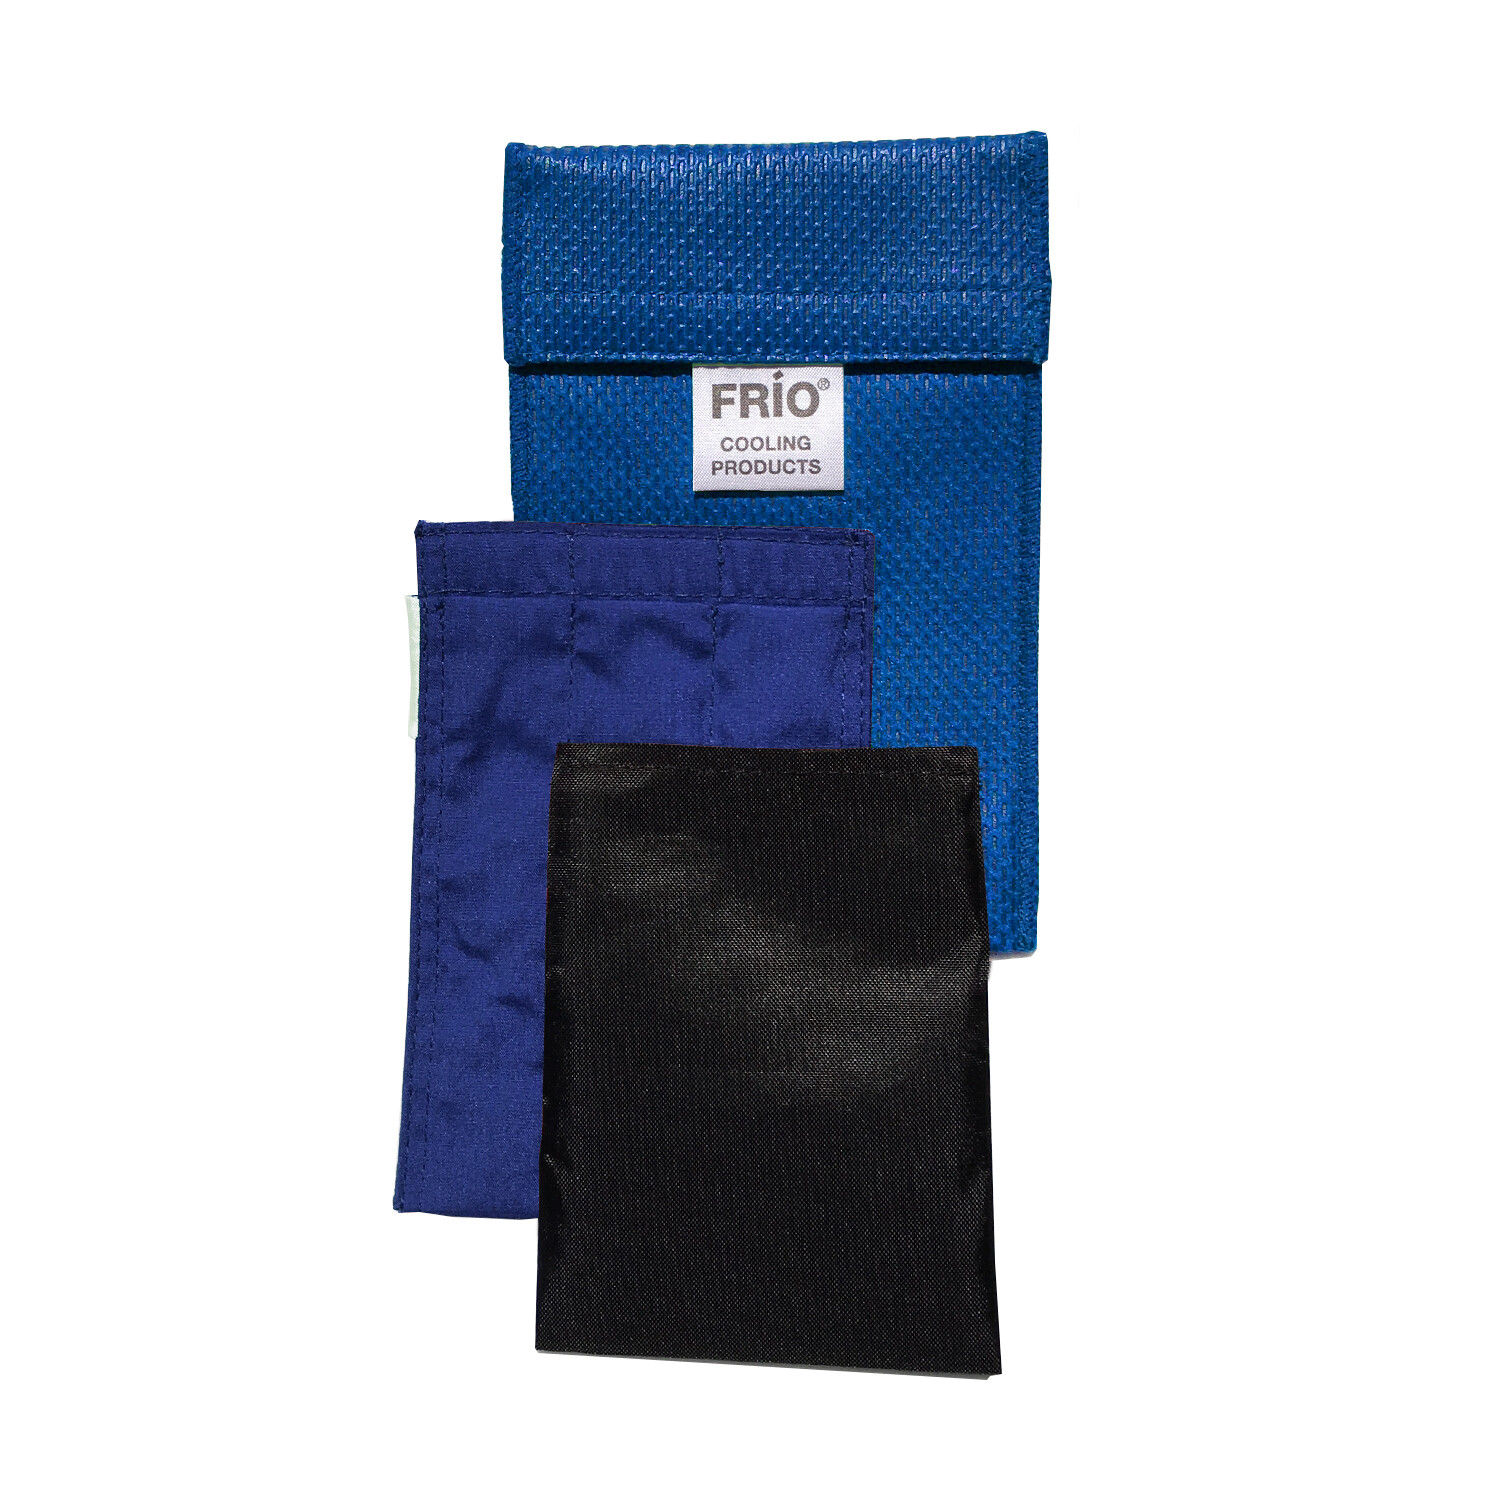 Frio diabetes supply cooling pouches